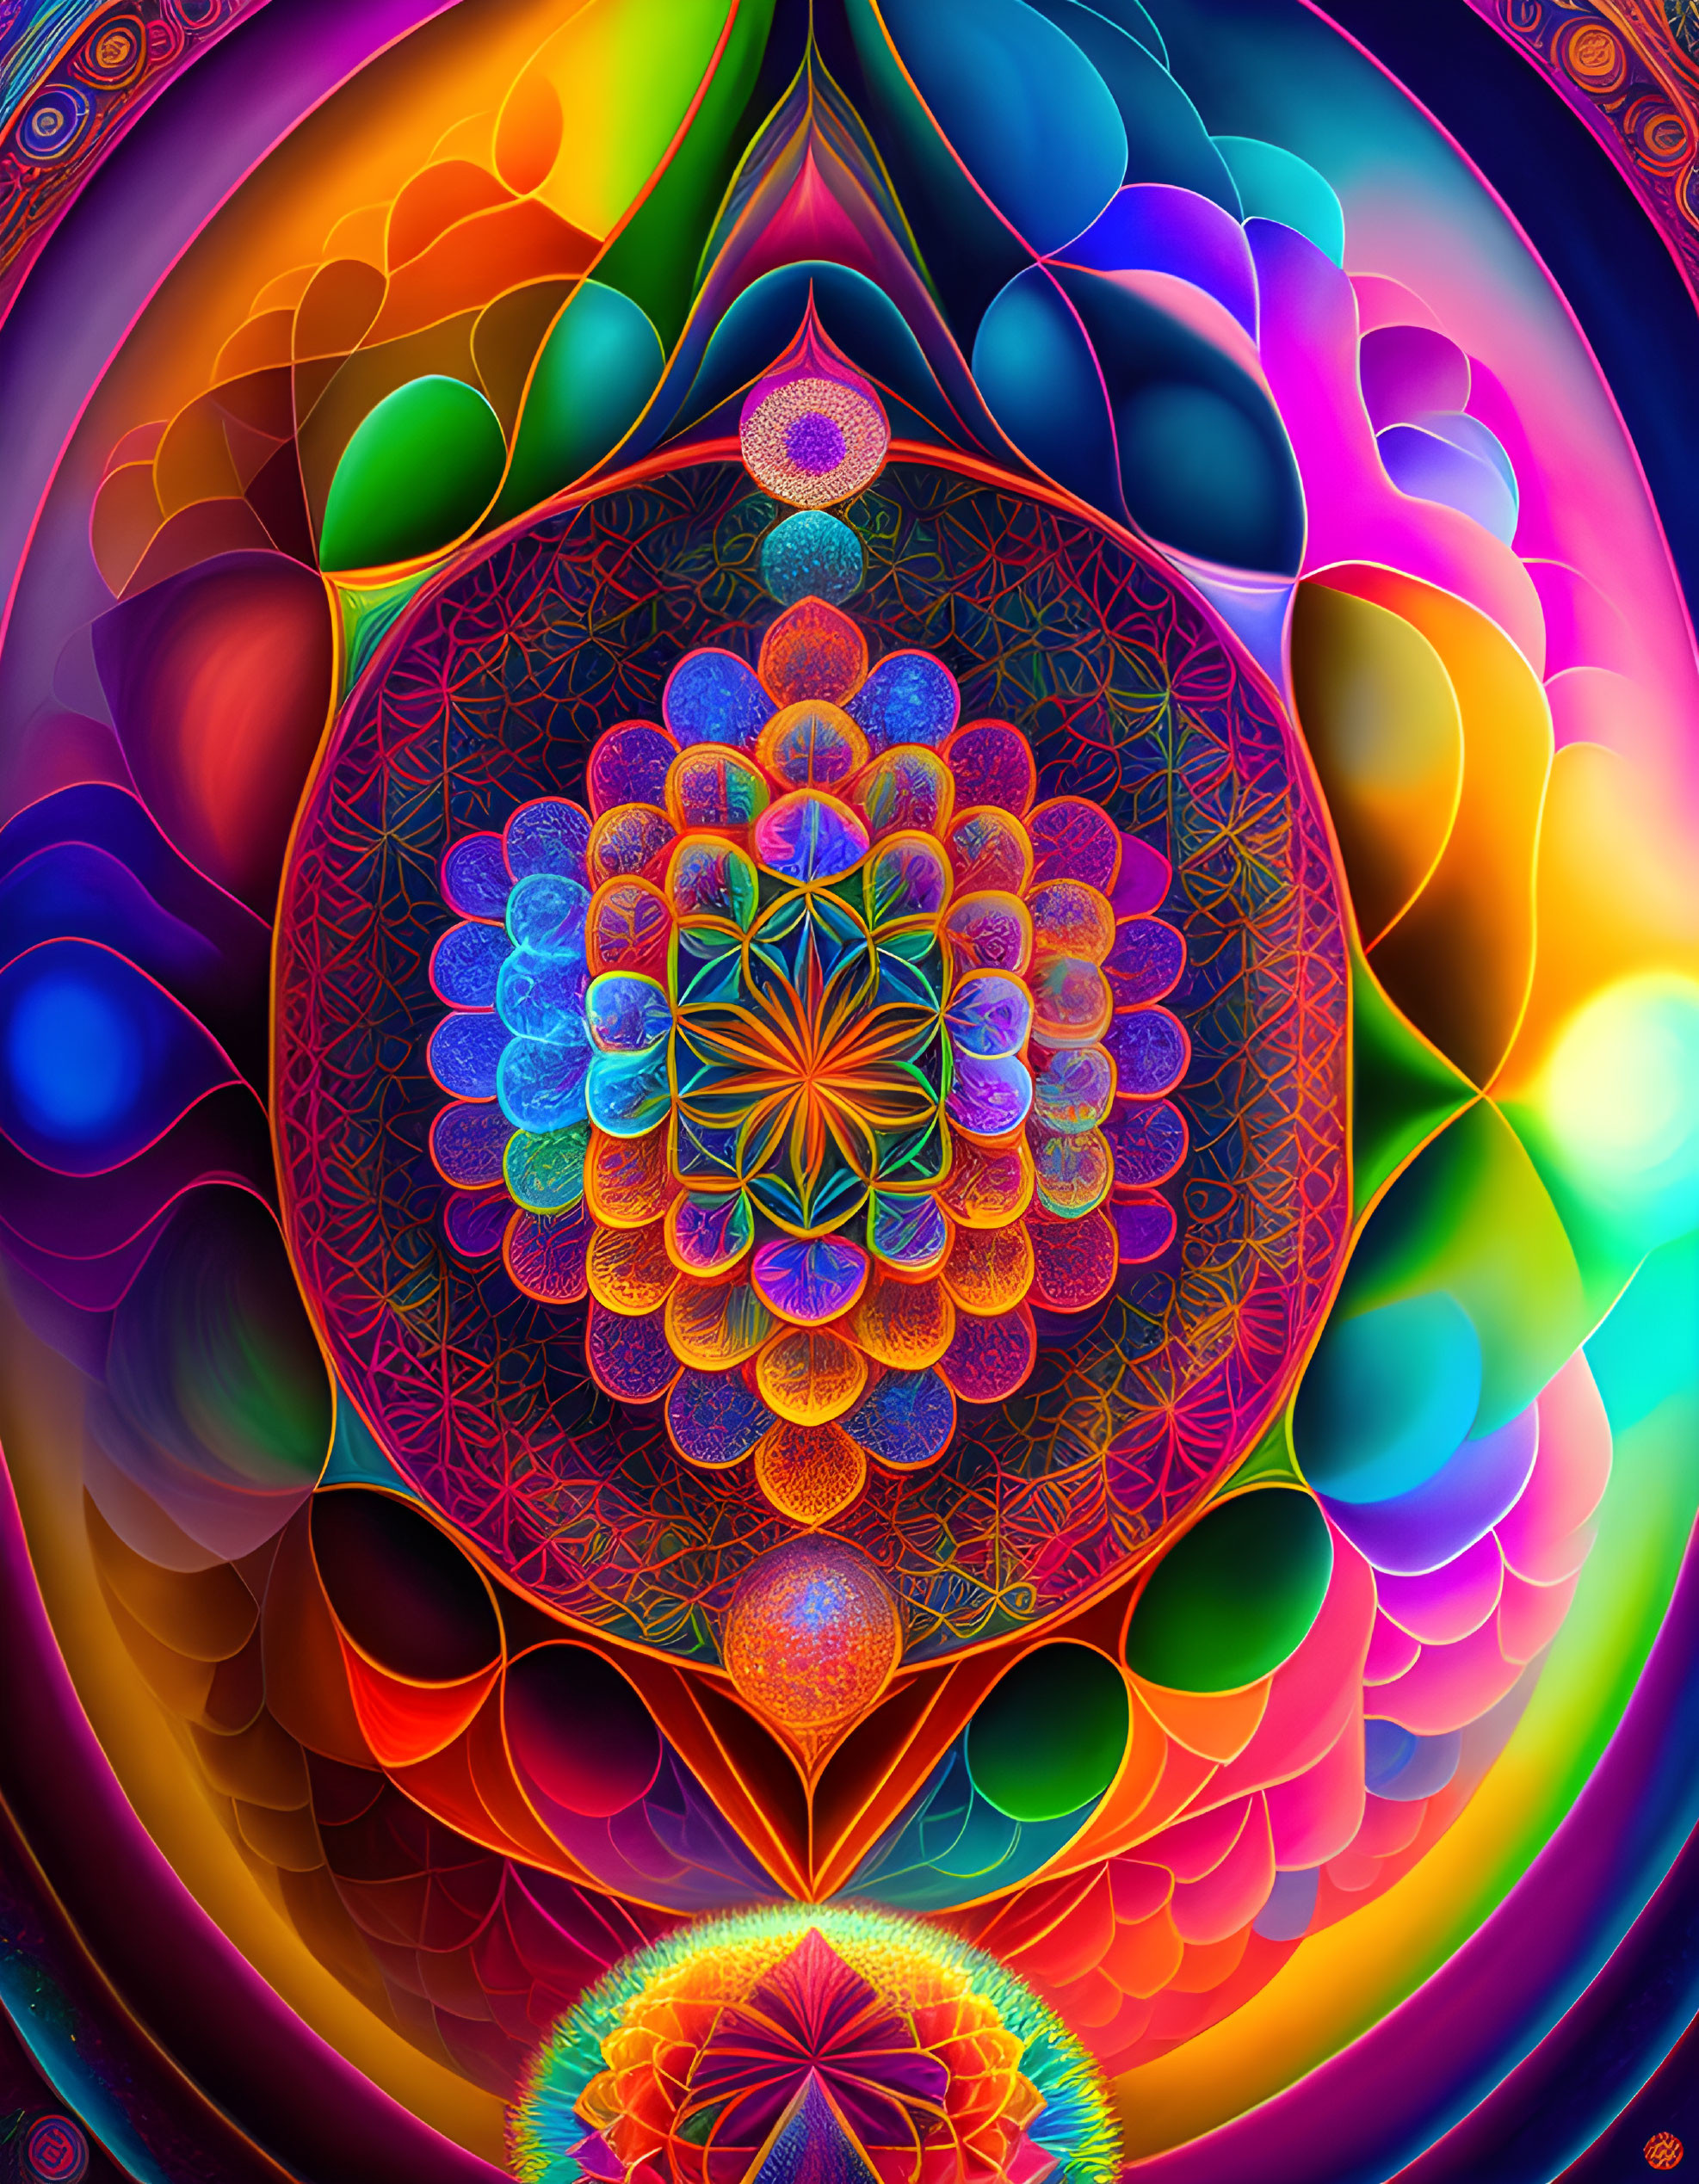 Flower of life in a psychedelic world 